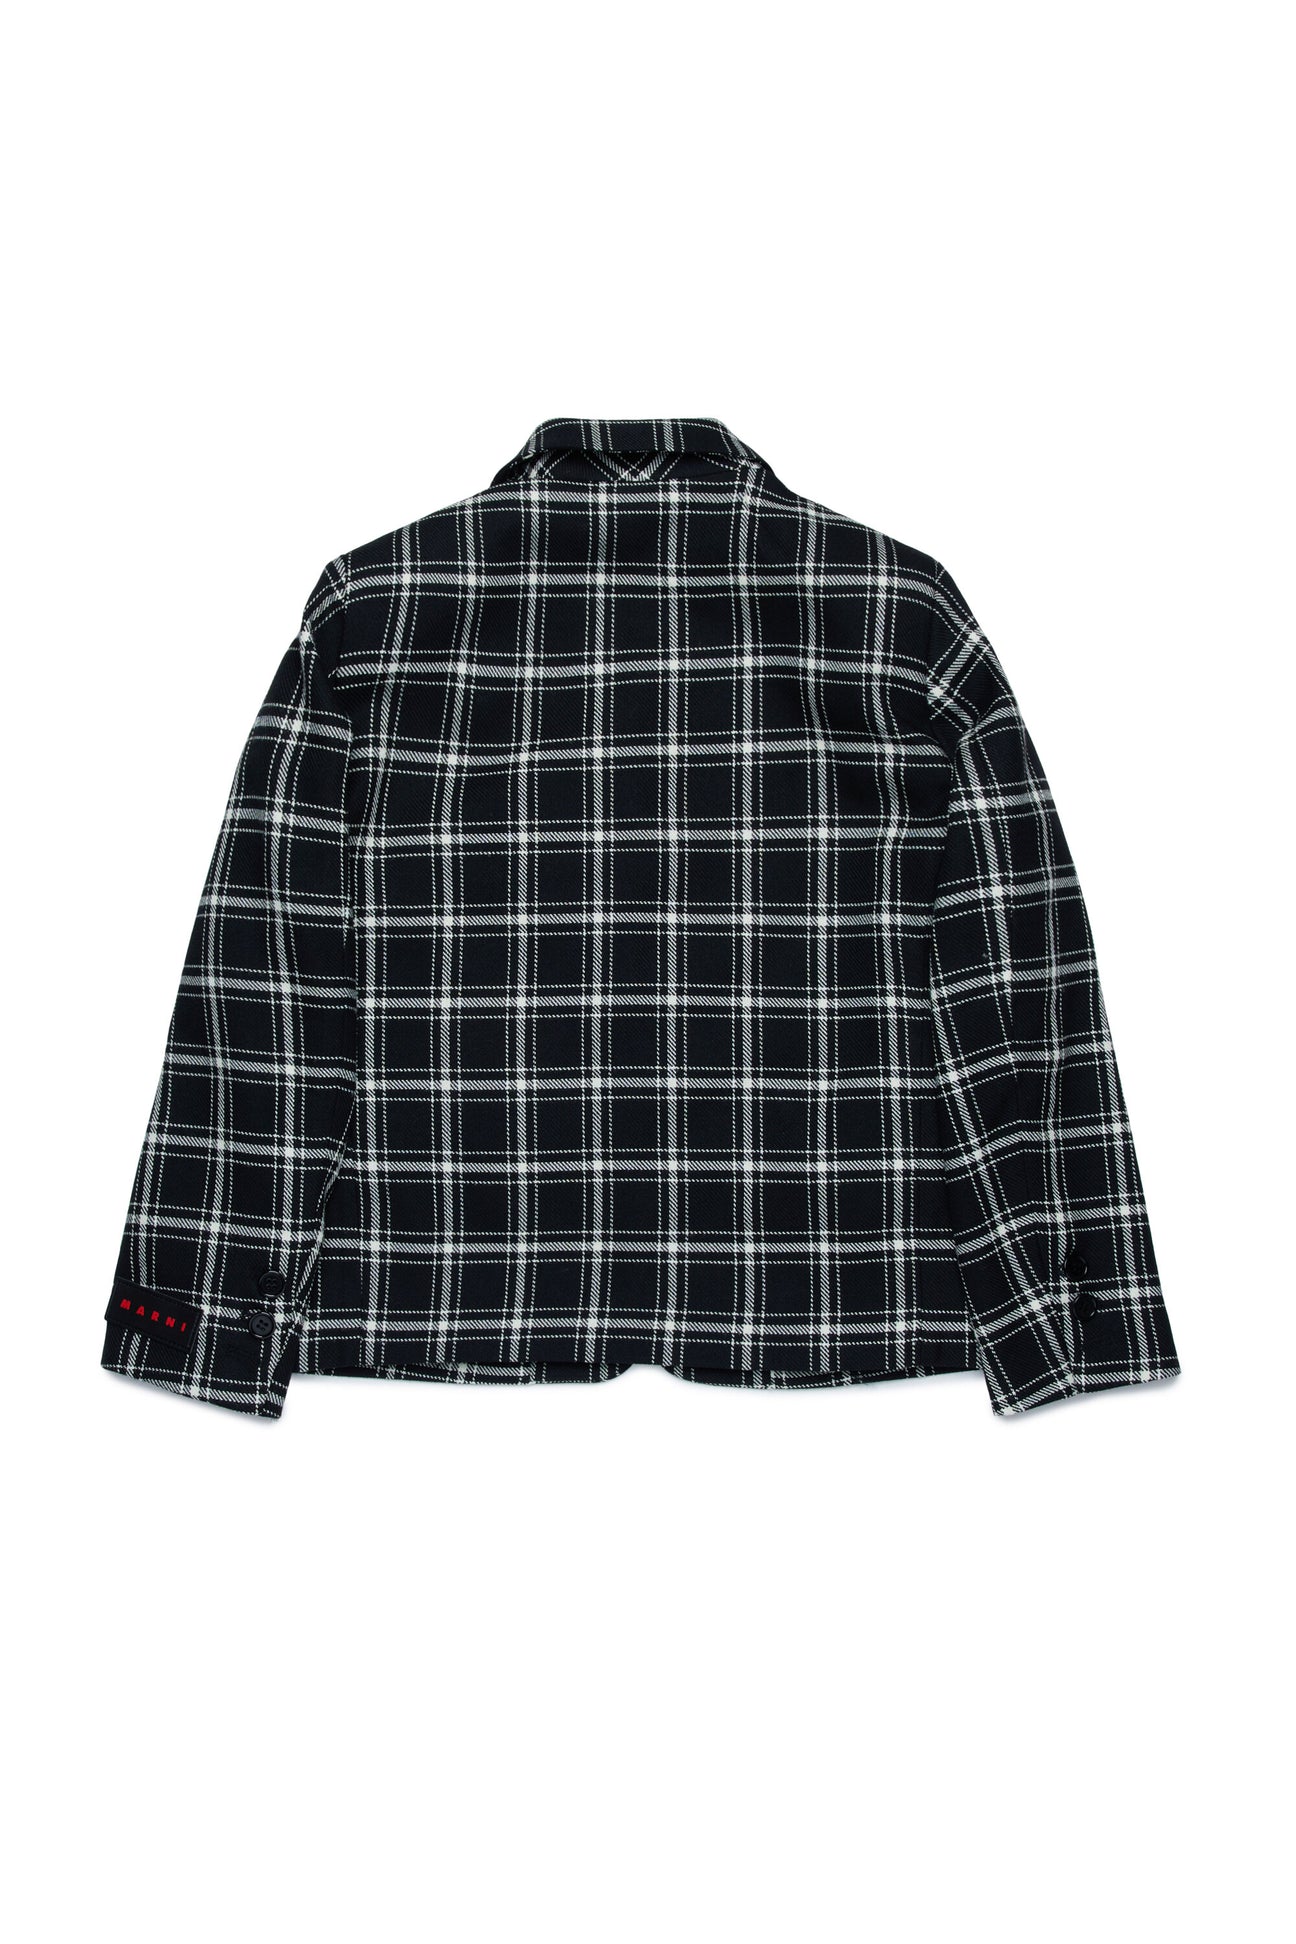 All-over check flannel jacket All-over check flannel jacket